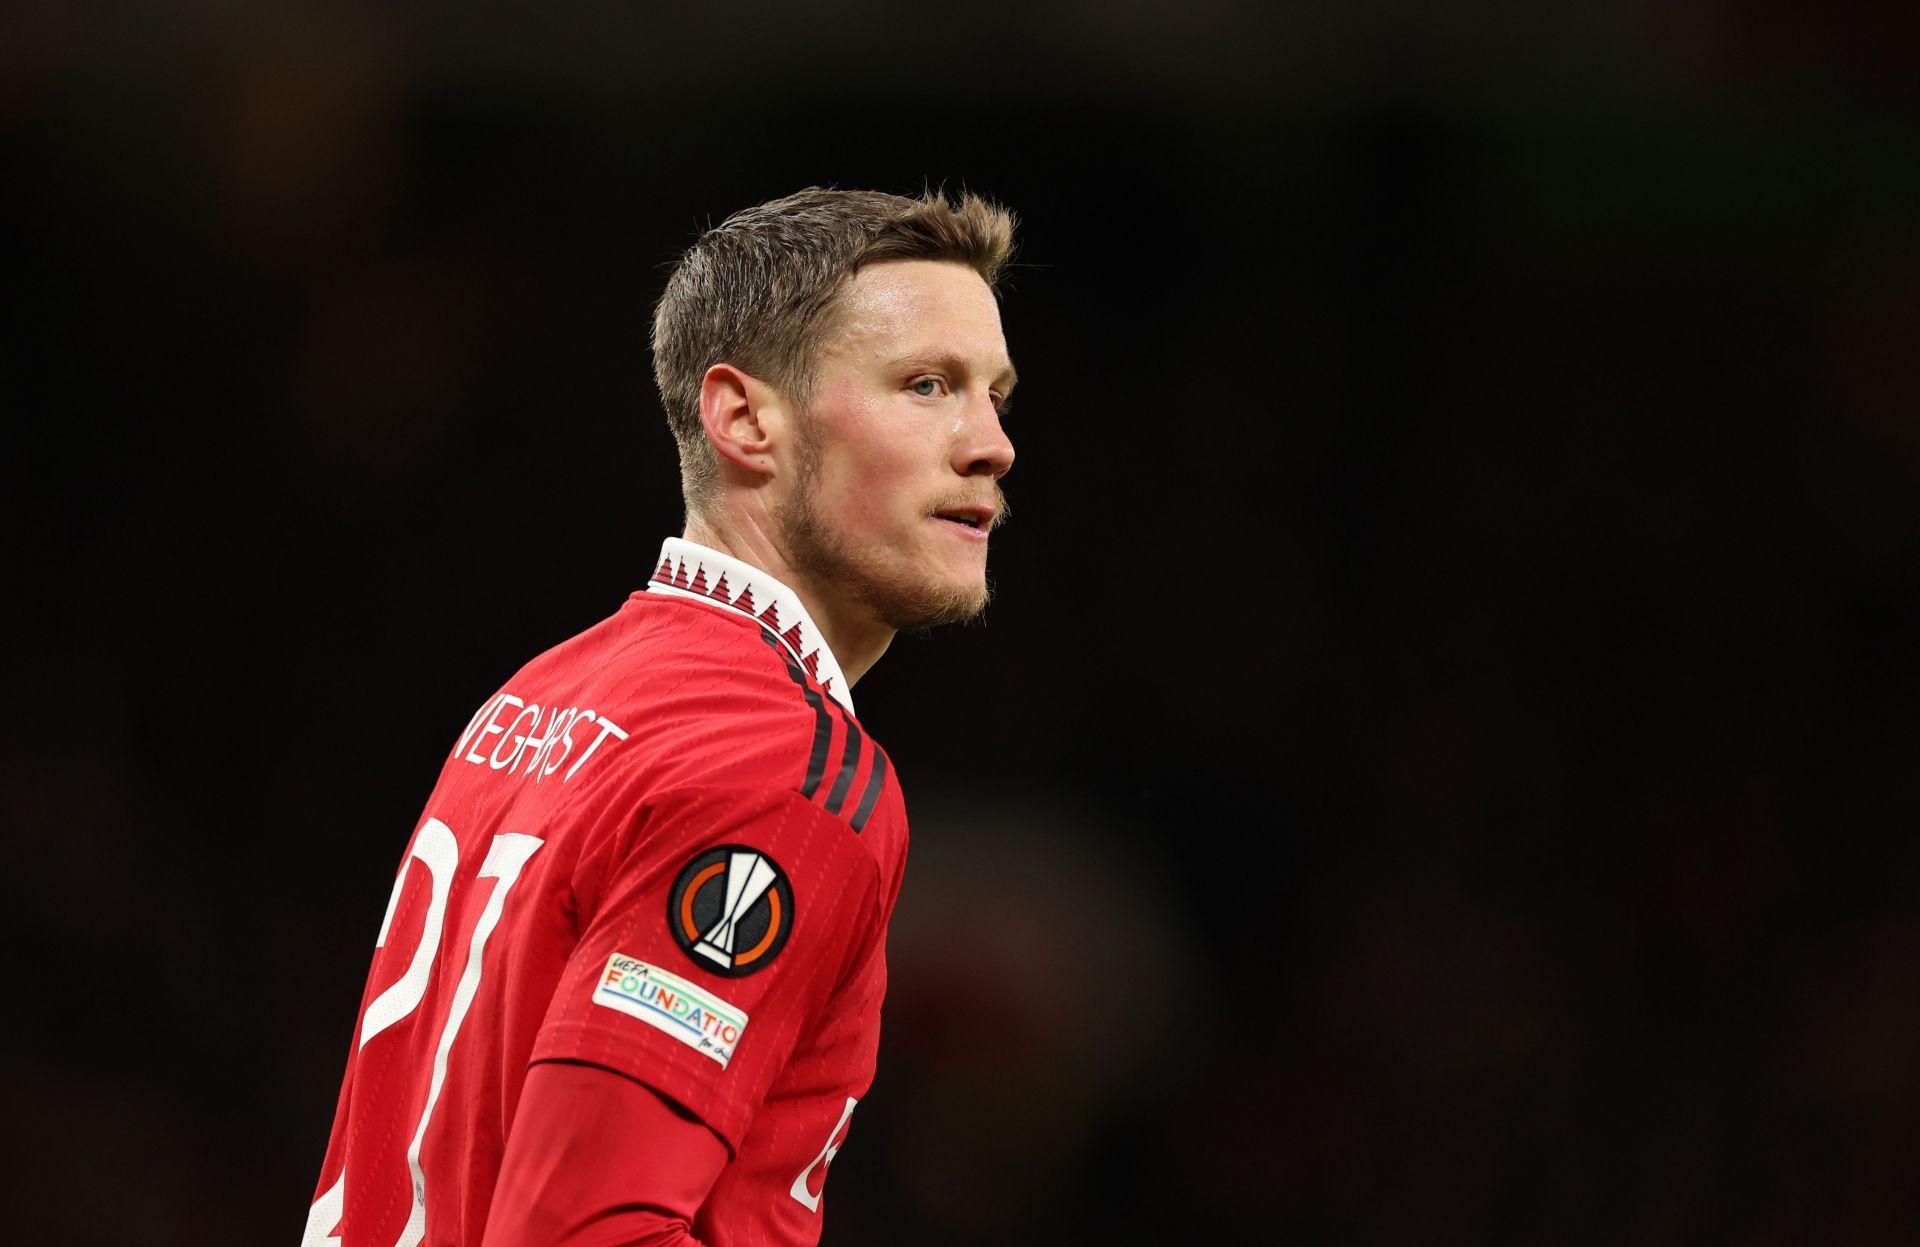 Wout Weghorst arrived at Old Trafford on loan this winter.